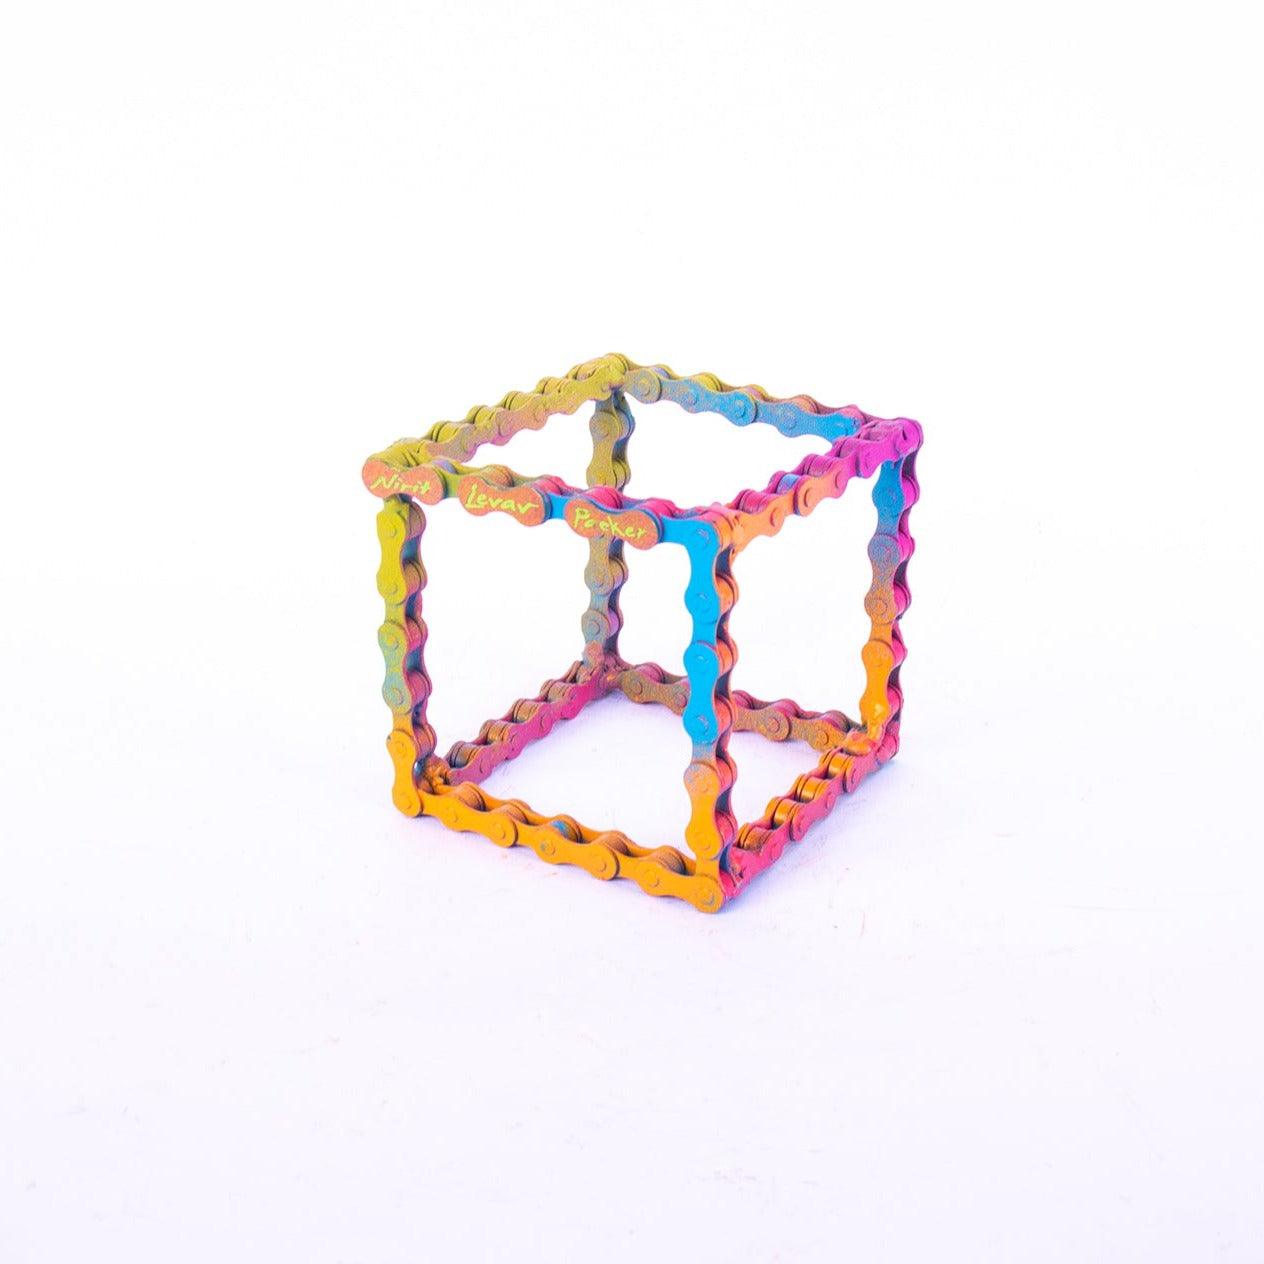 Cube Sculpture | UNCHAINED by NIRIT LEVAV PACKER